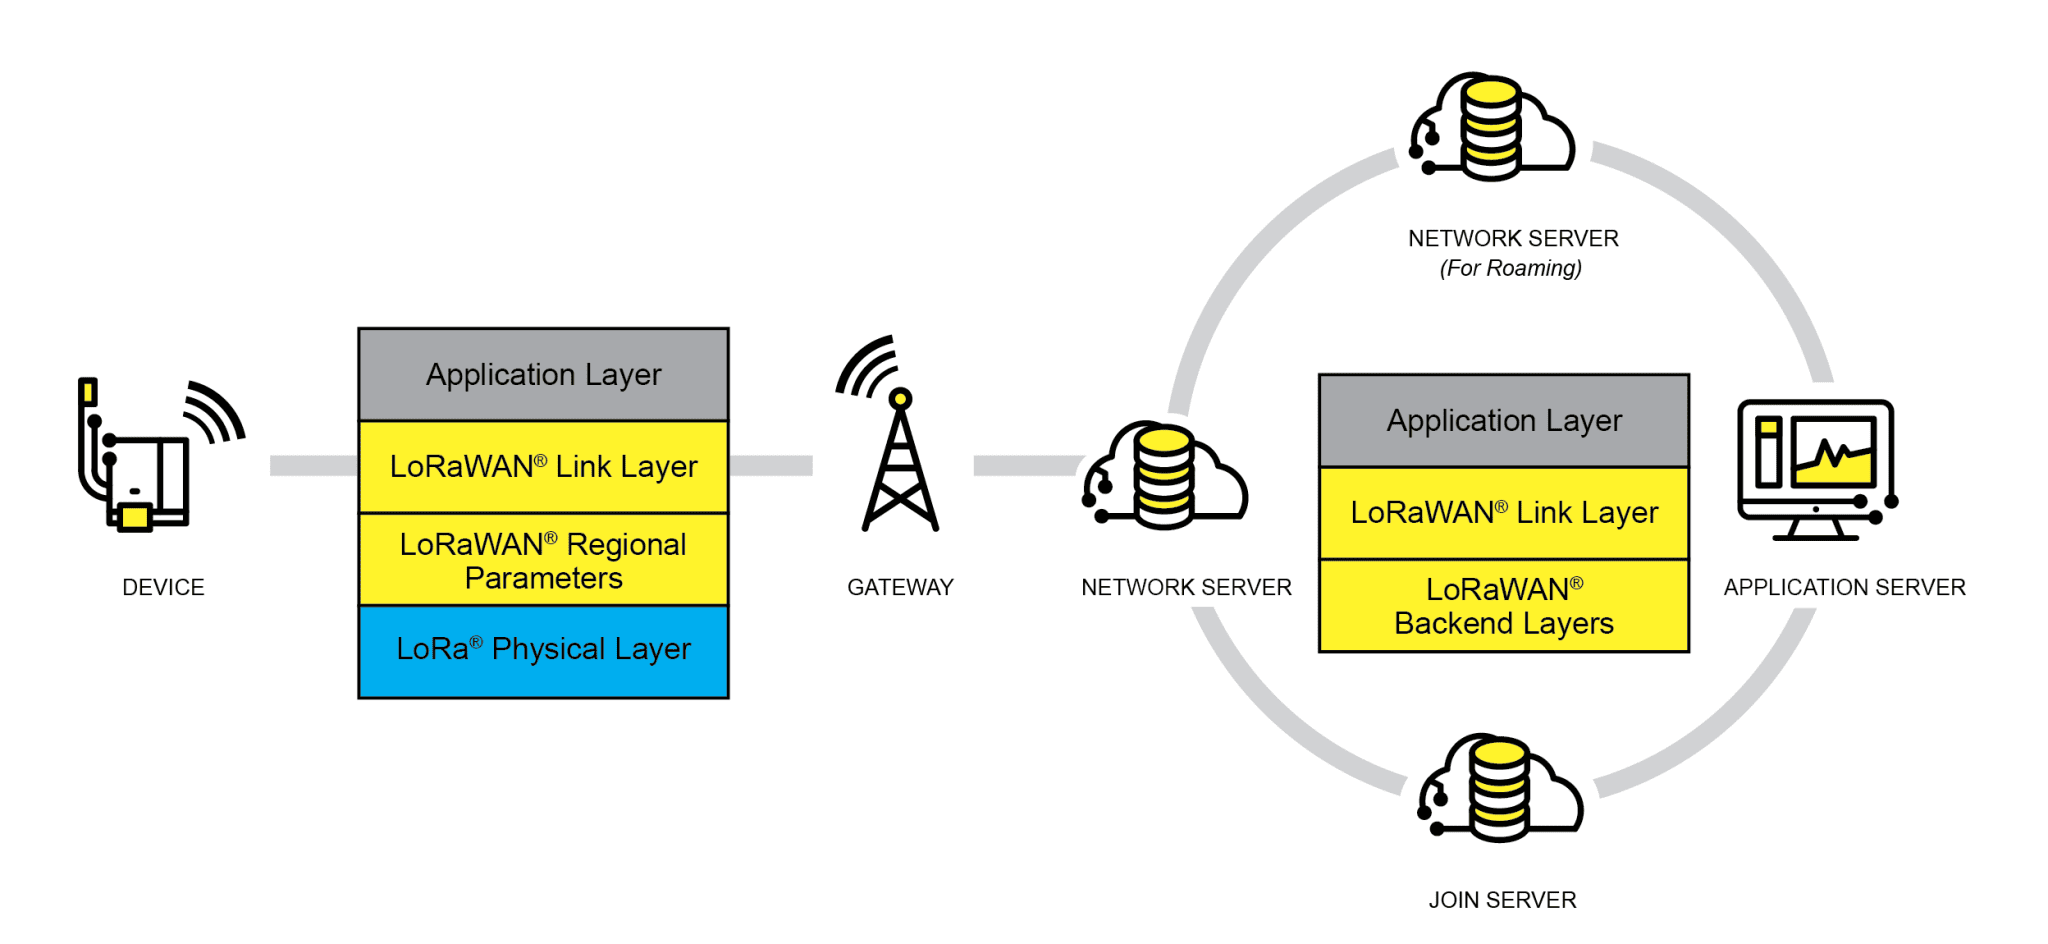 Guide for What LoRaWAN is!